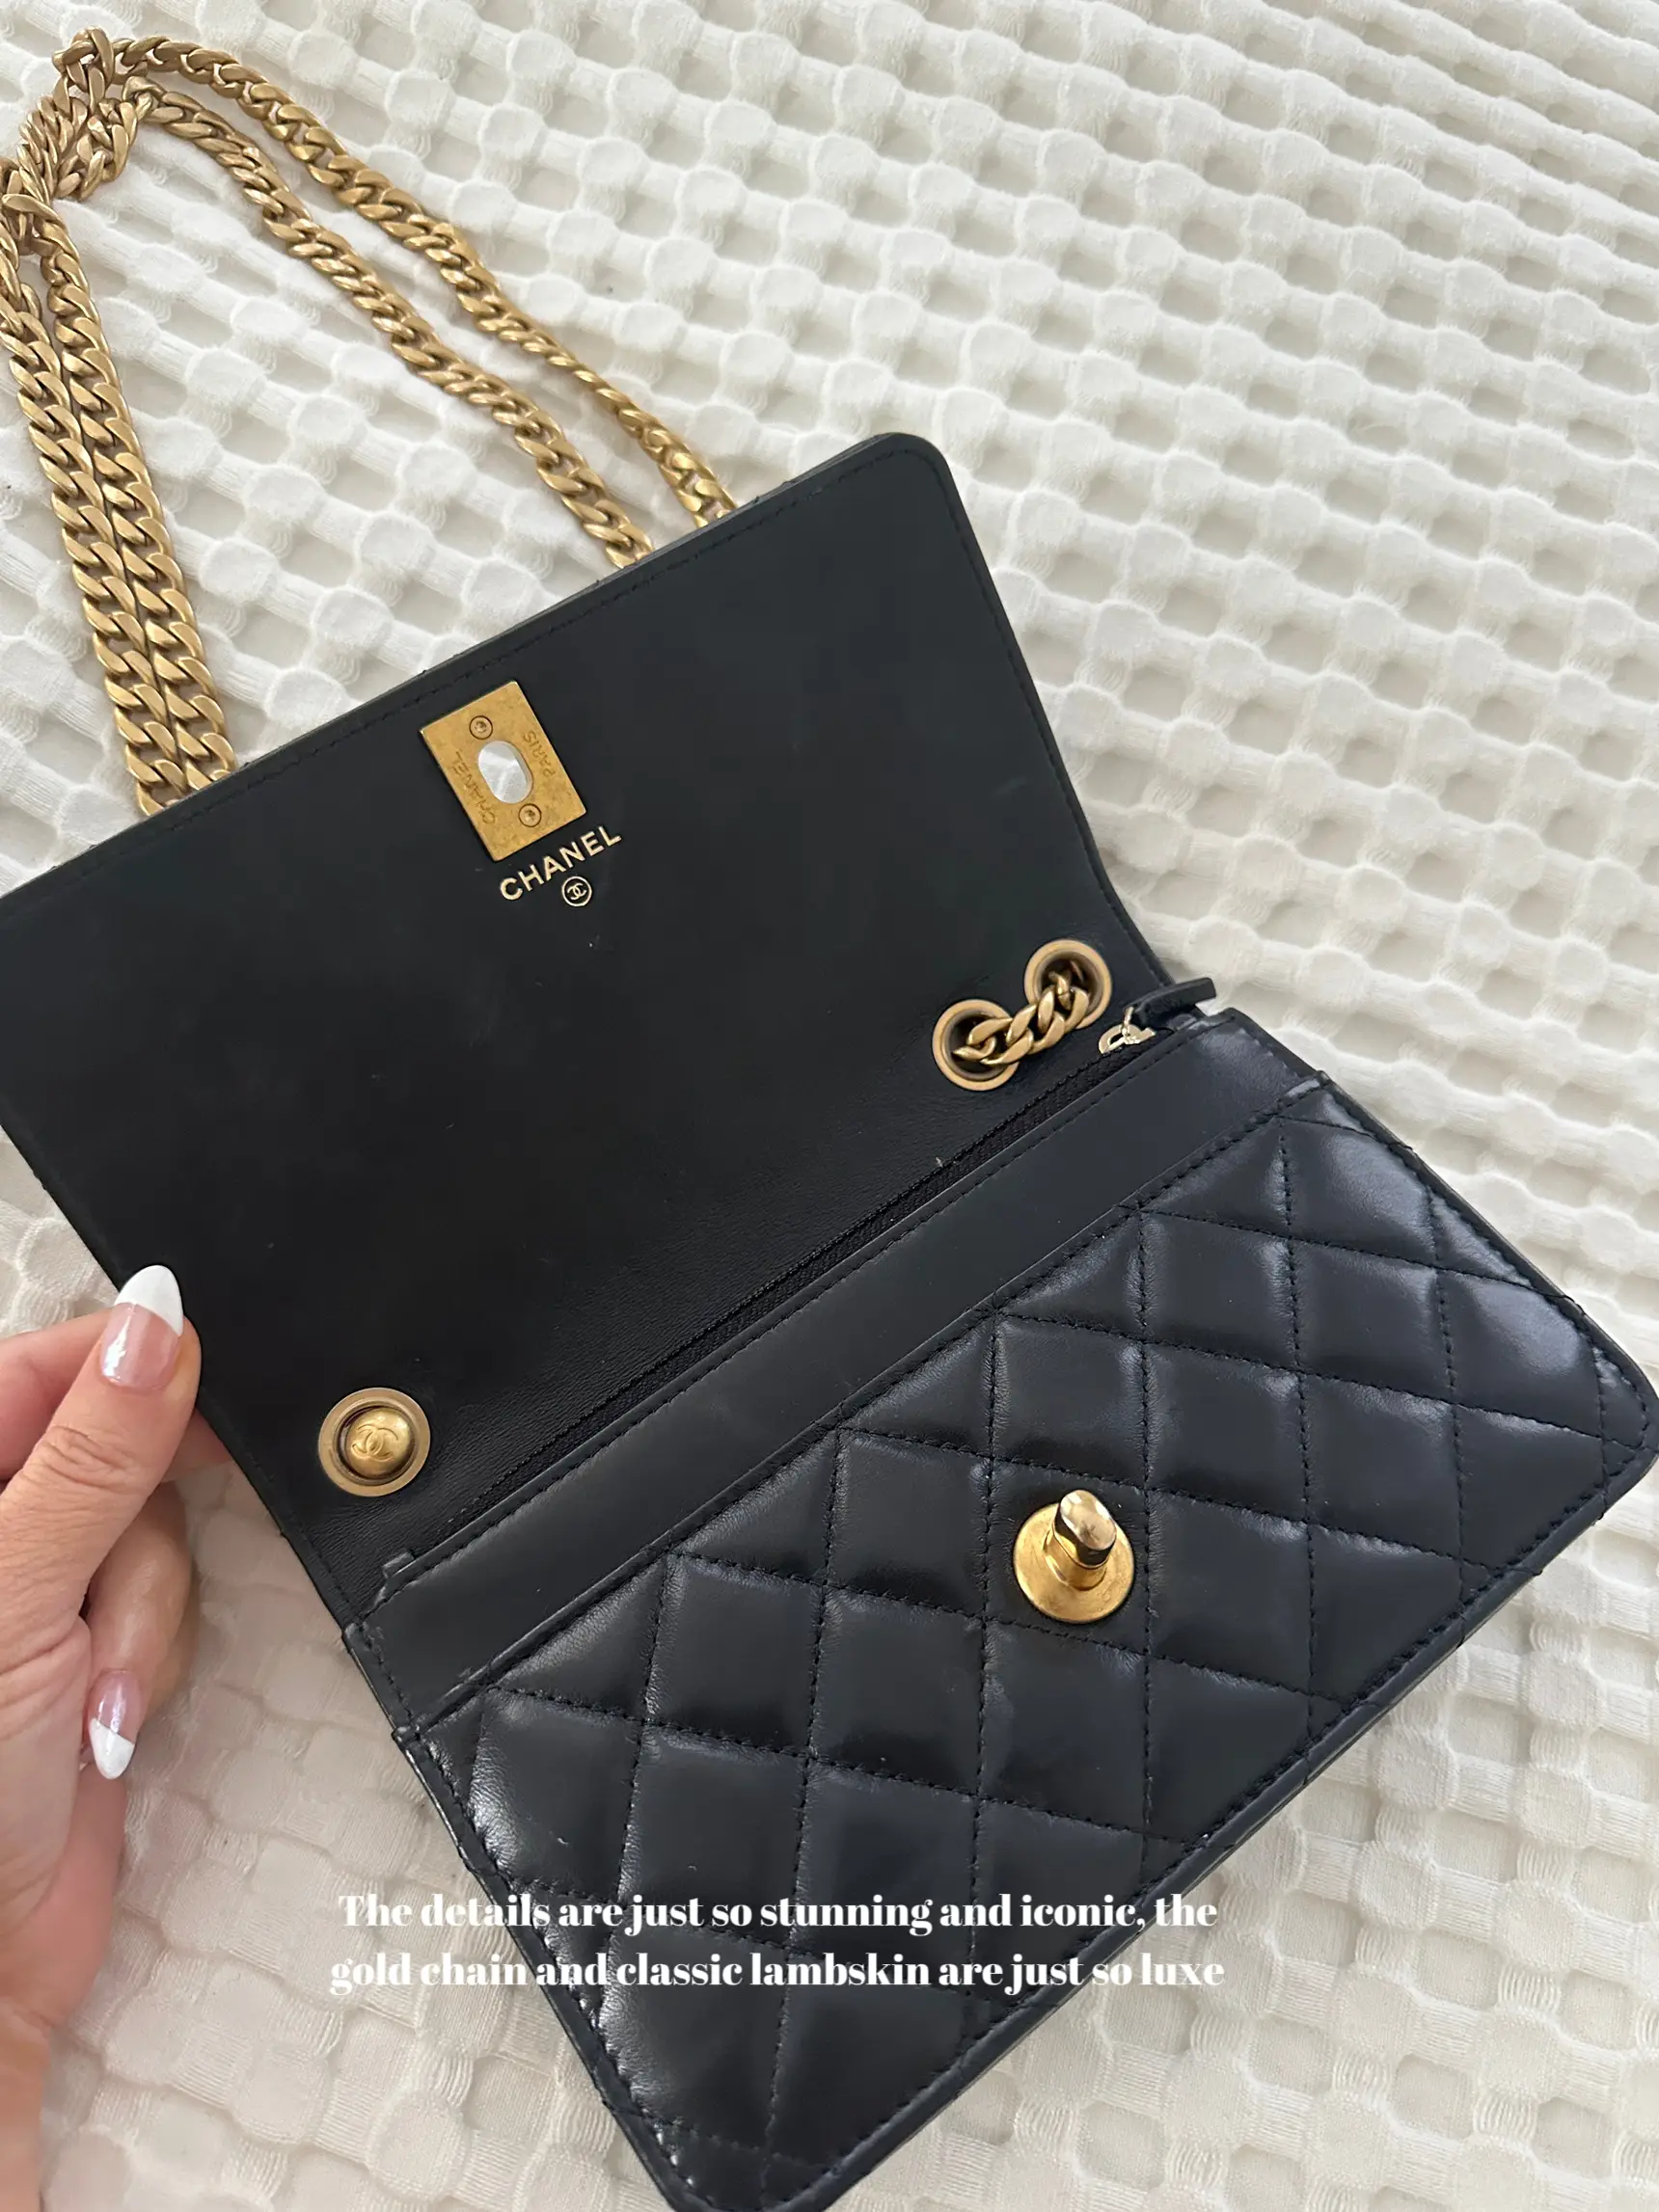 chanel black and beige bag chain